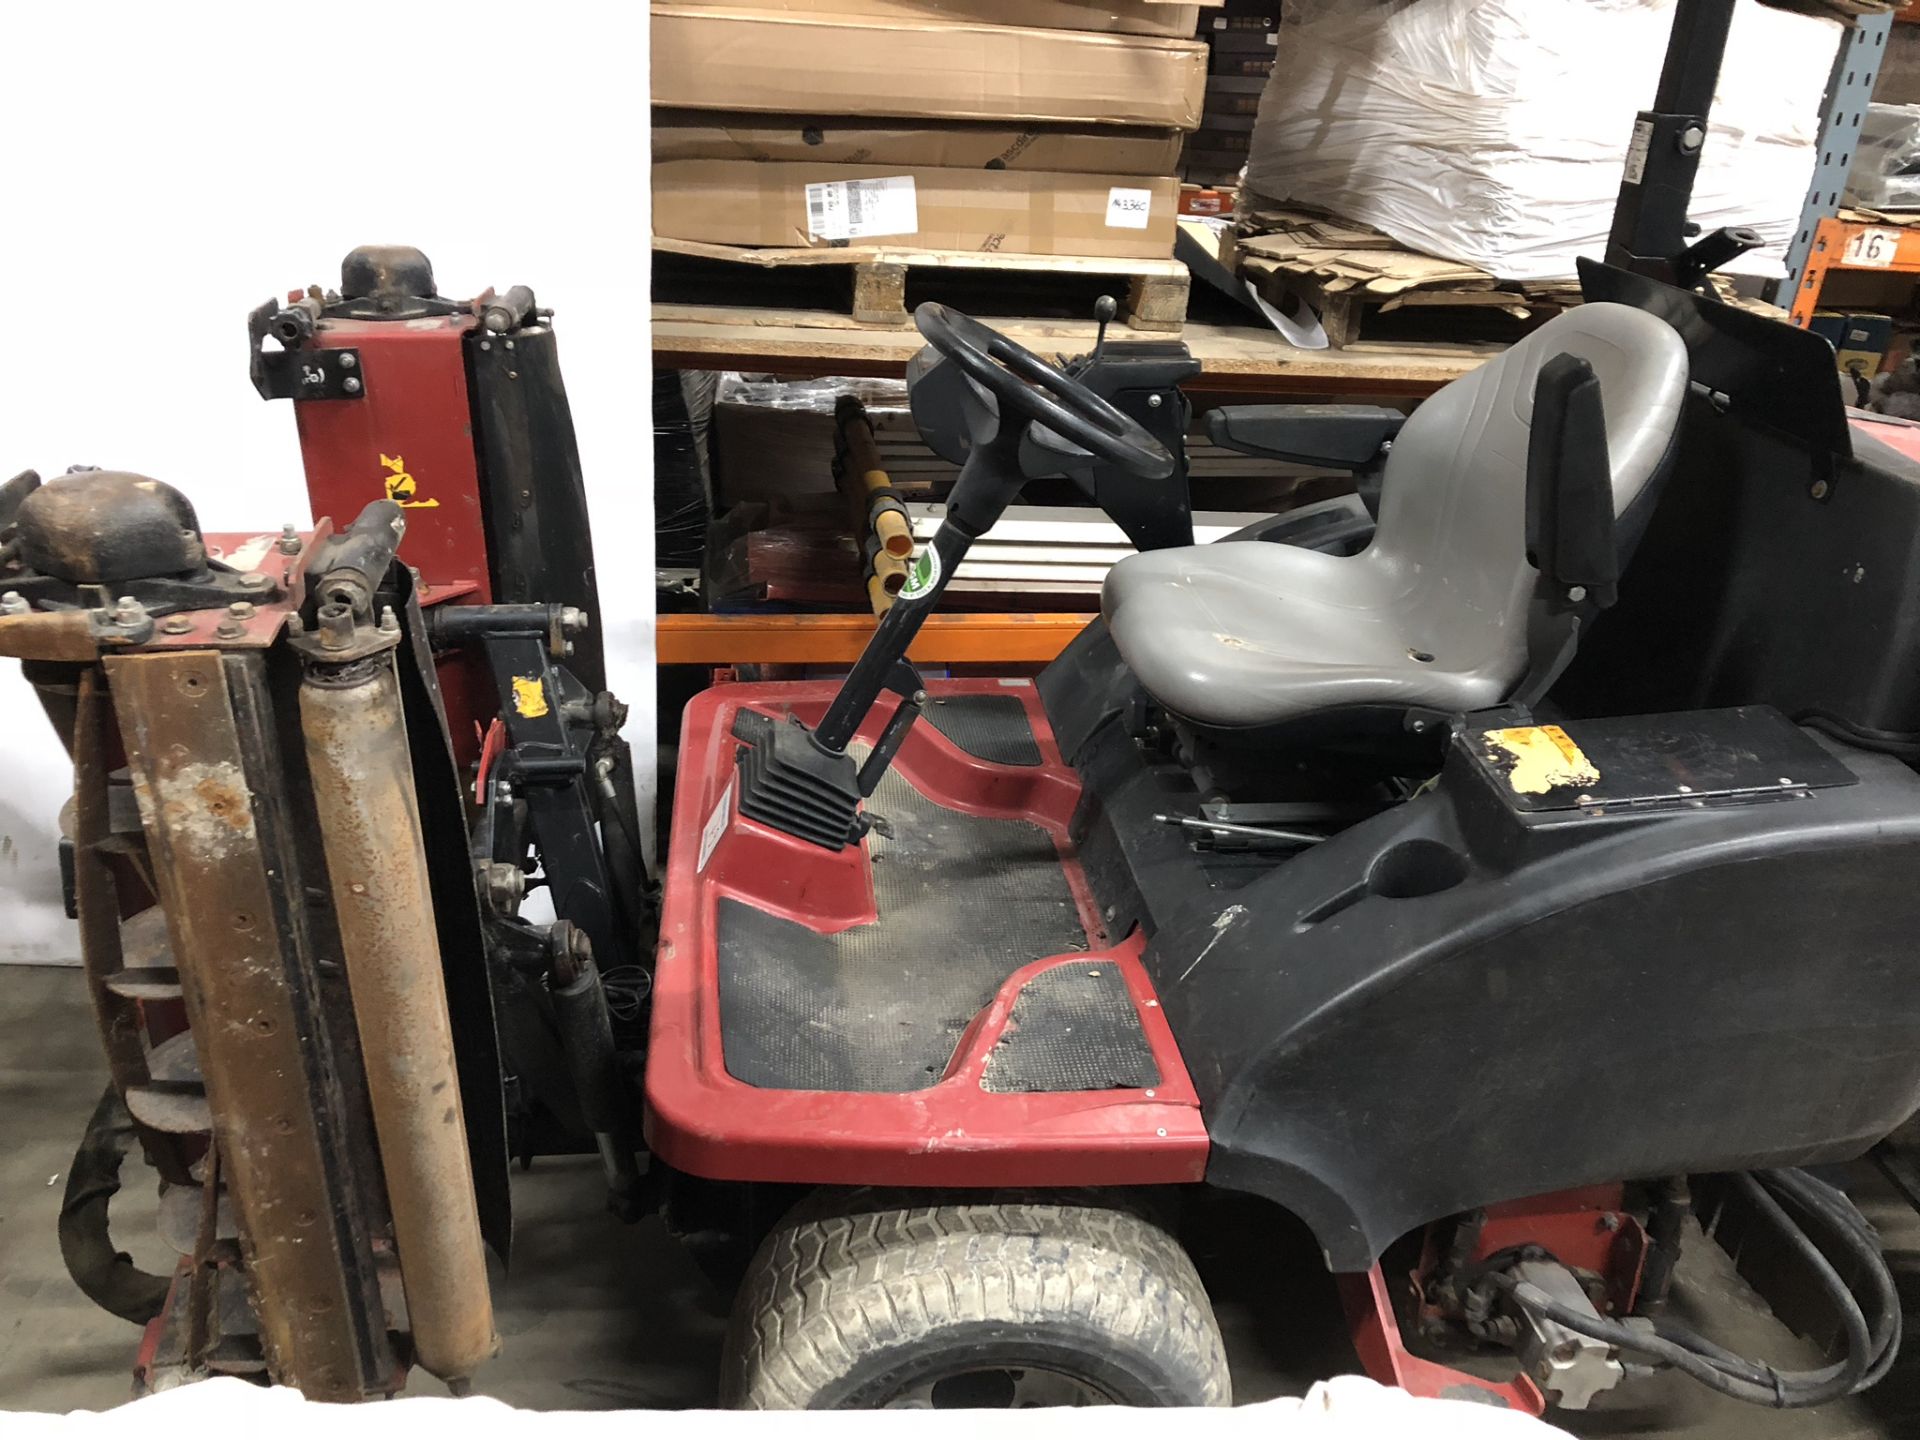 Toro CT2140 Ride-On Mower - EU11 AOL - With 3 x Cutting Blades | Hours: 3363.0 - Image 3 of 5